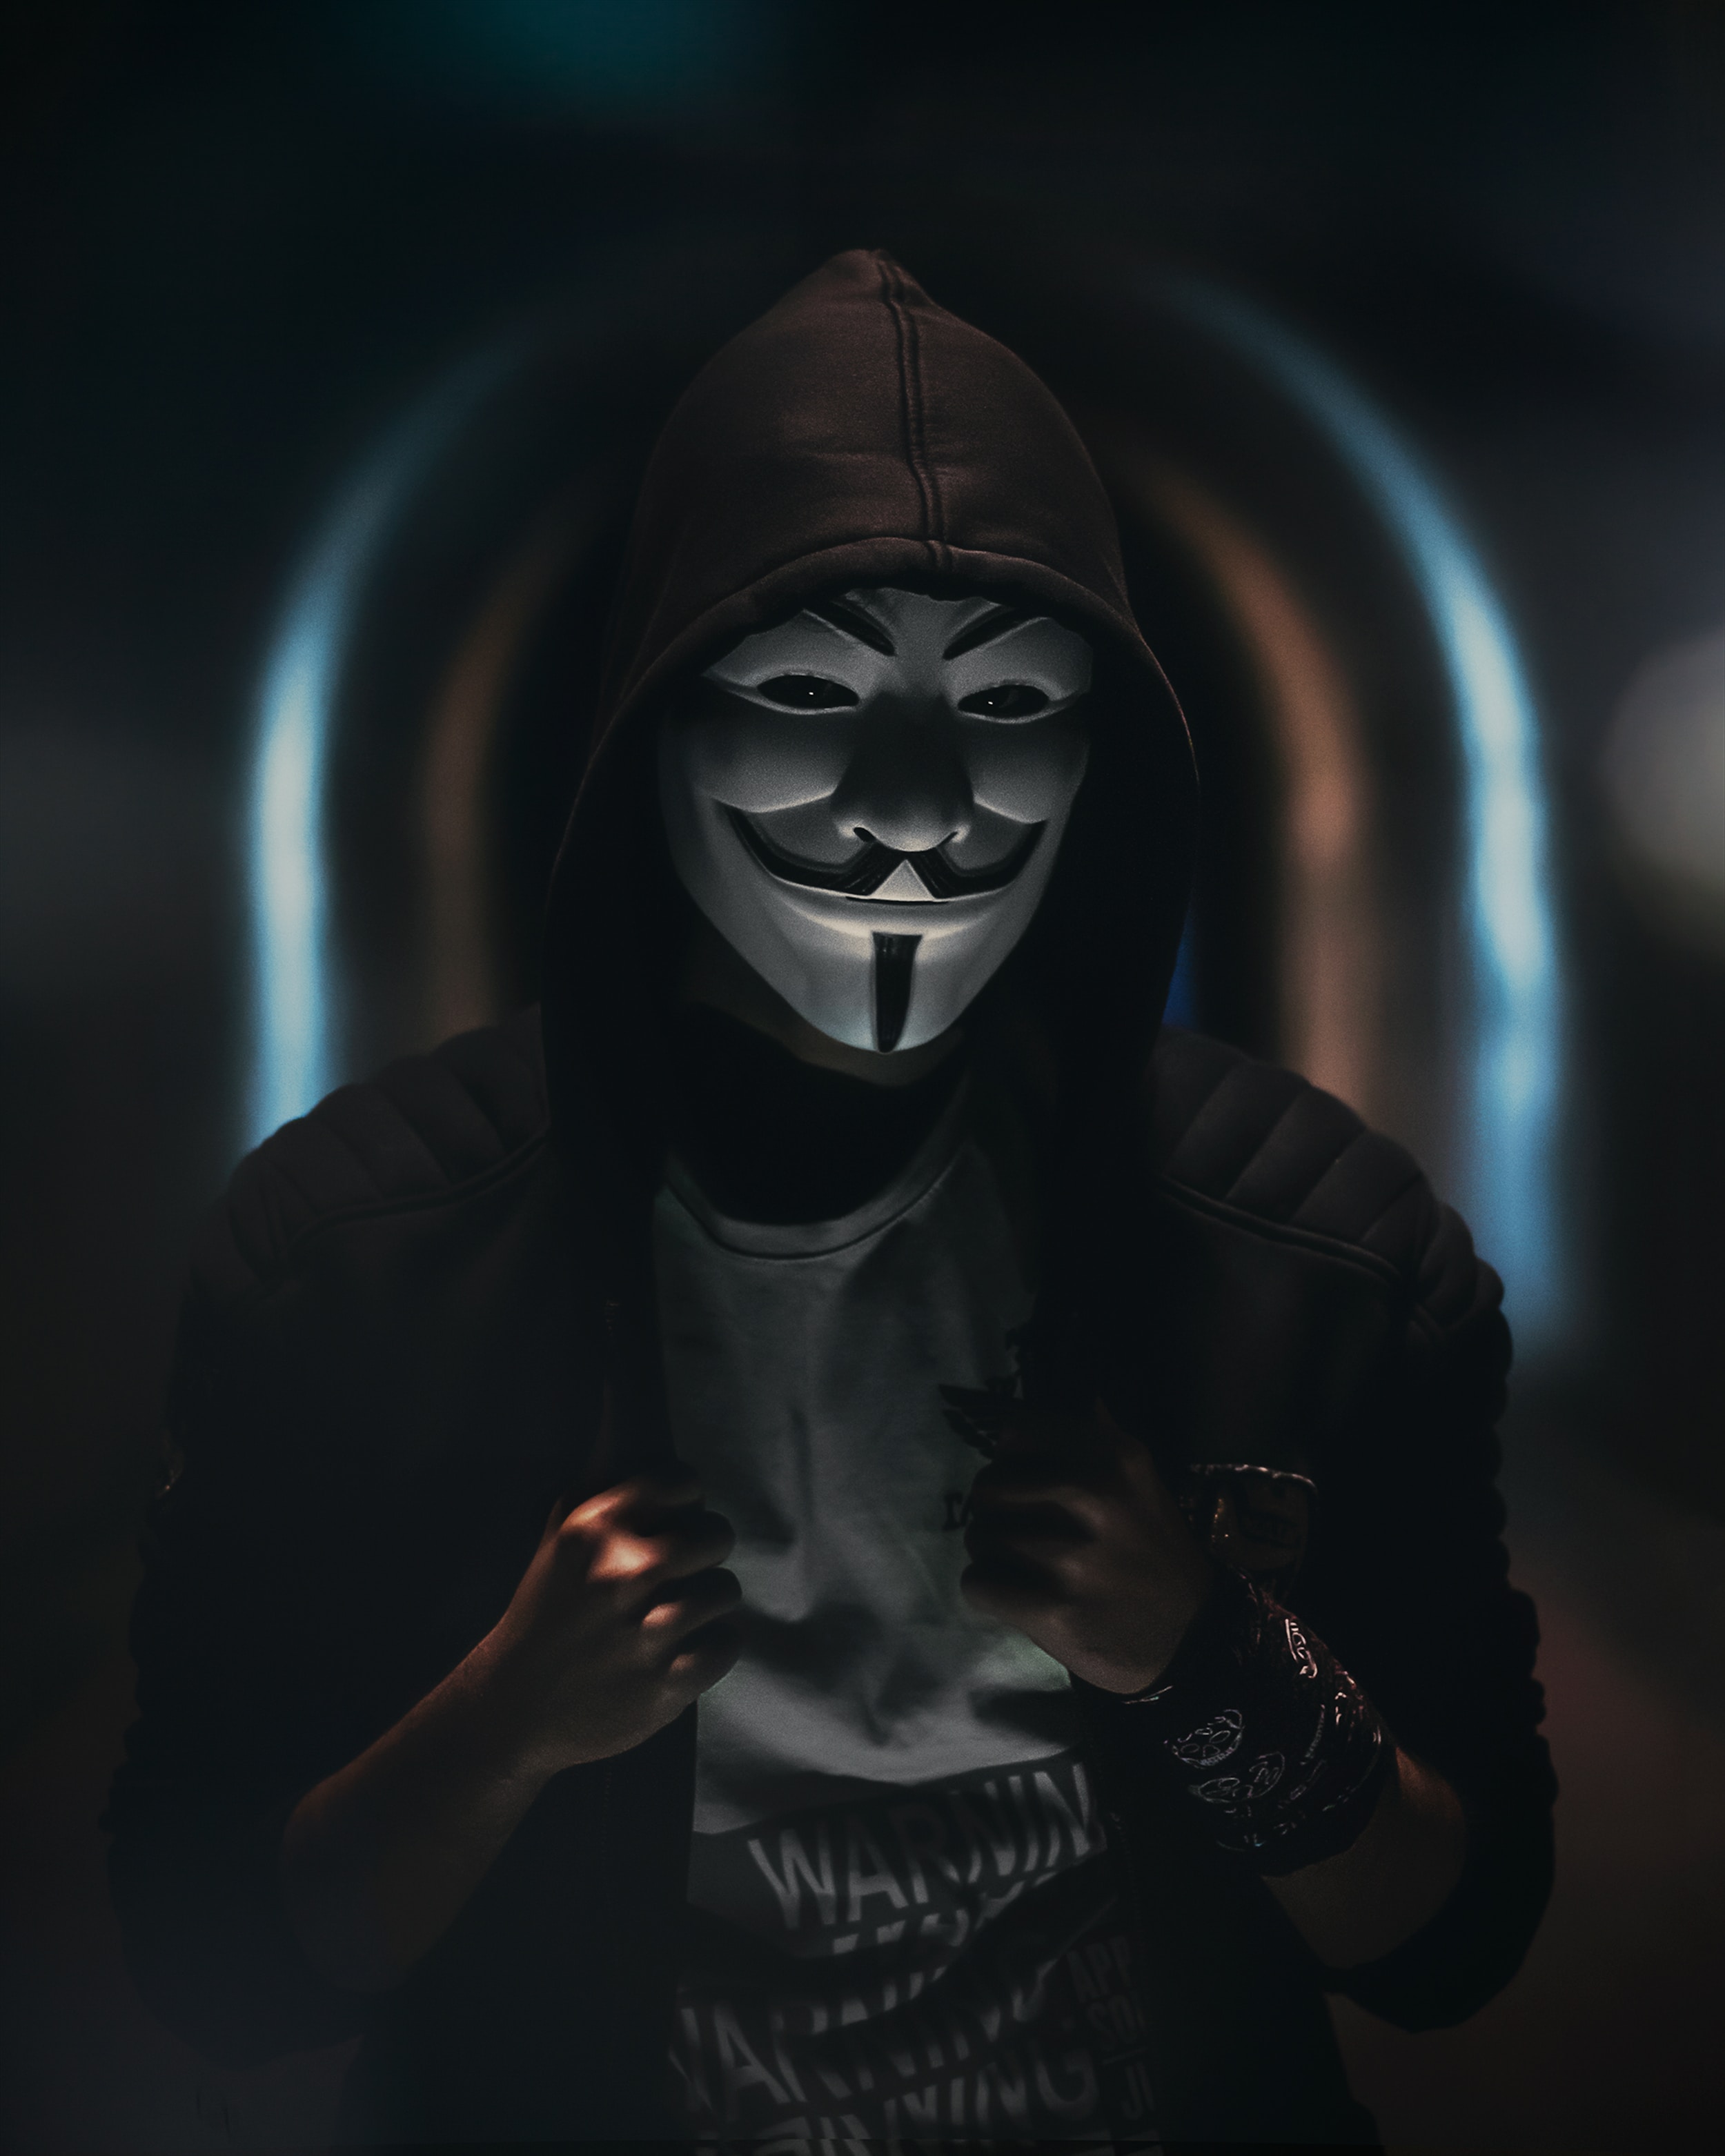 wallpapers dark, anonymous, miscellanea, miscellaneous, mask, human, person, hood